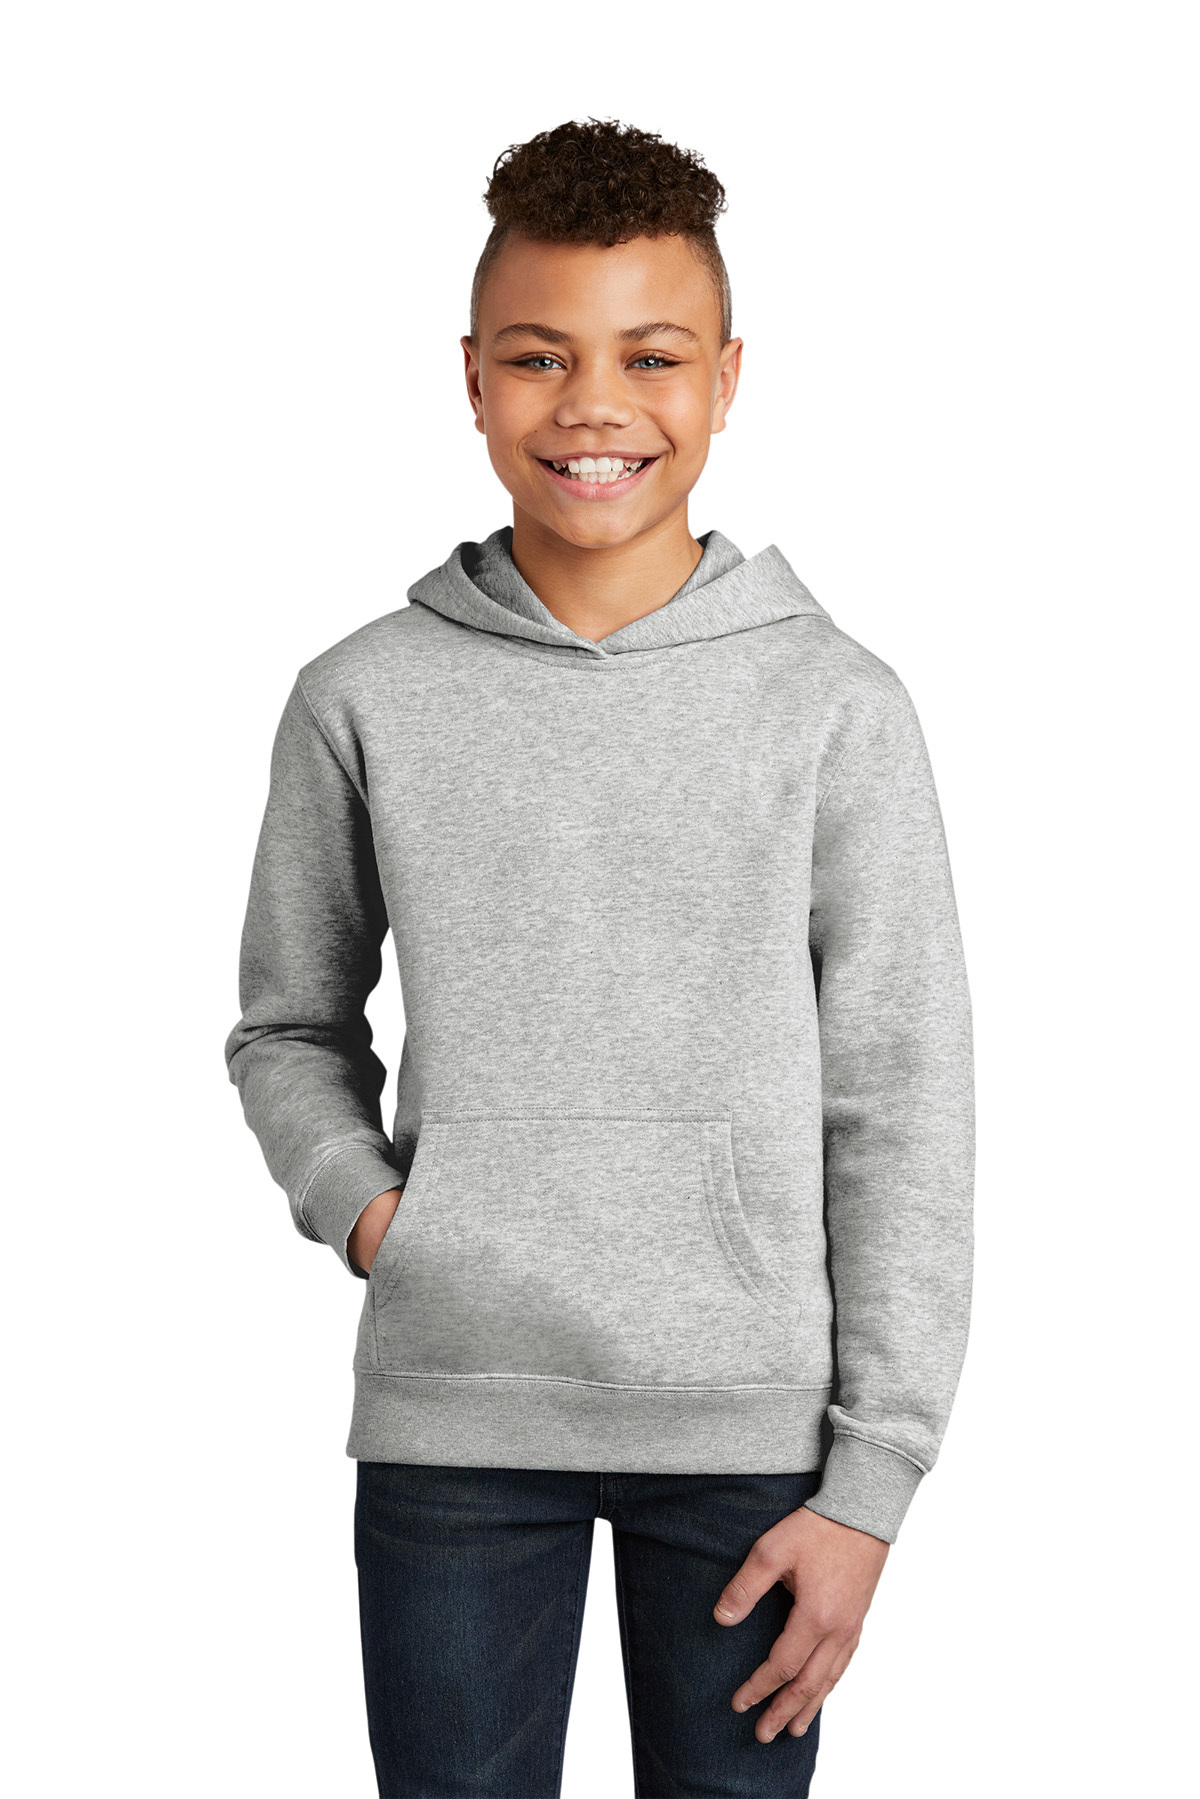 District Youth V.I.T. Fleece Hoodie | Product | SanMar